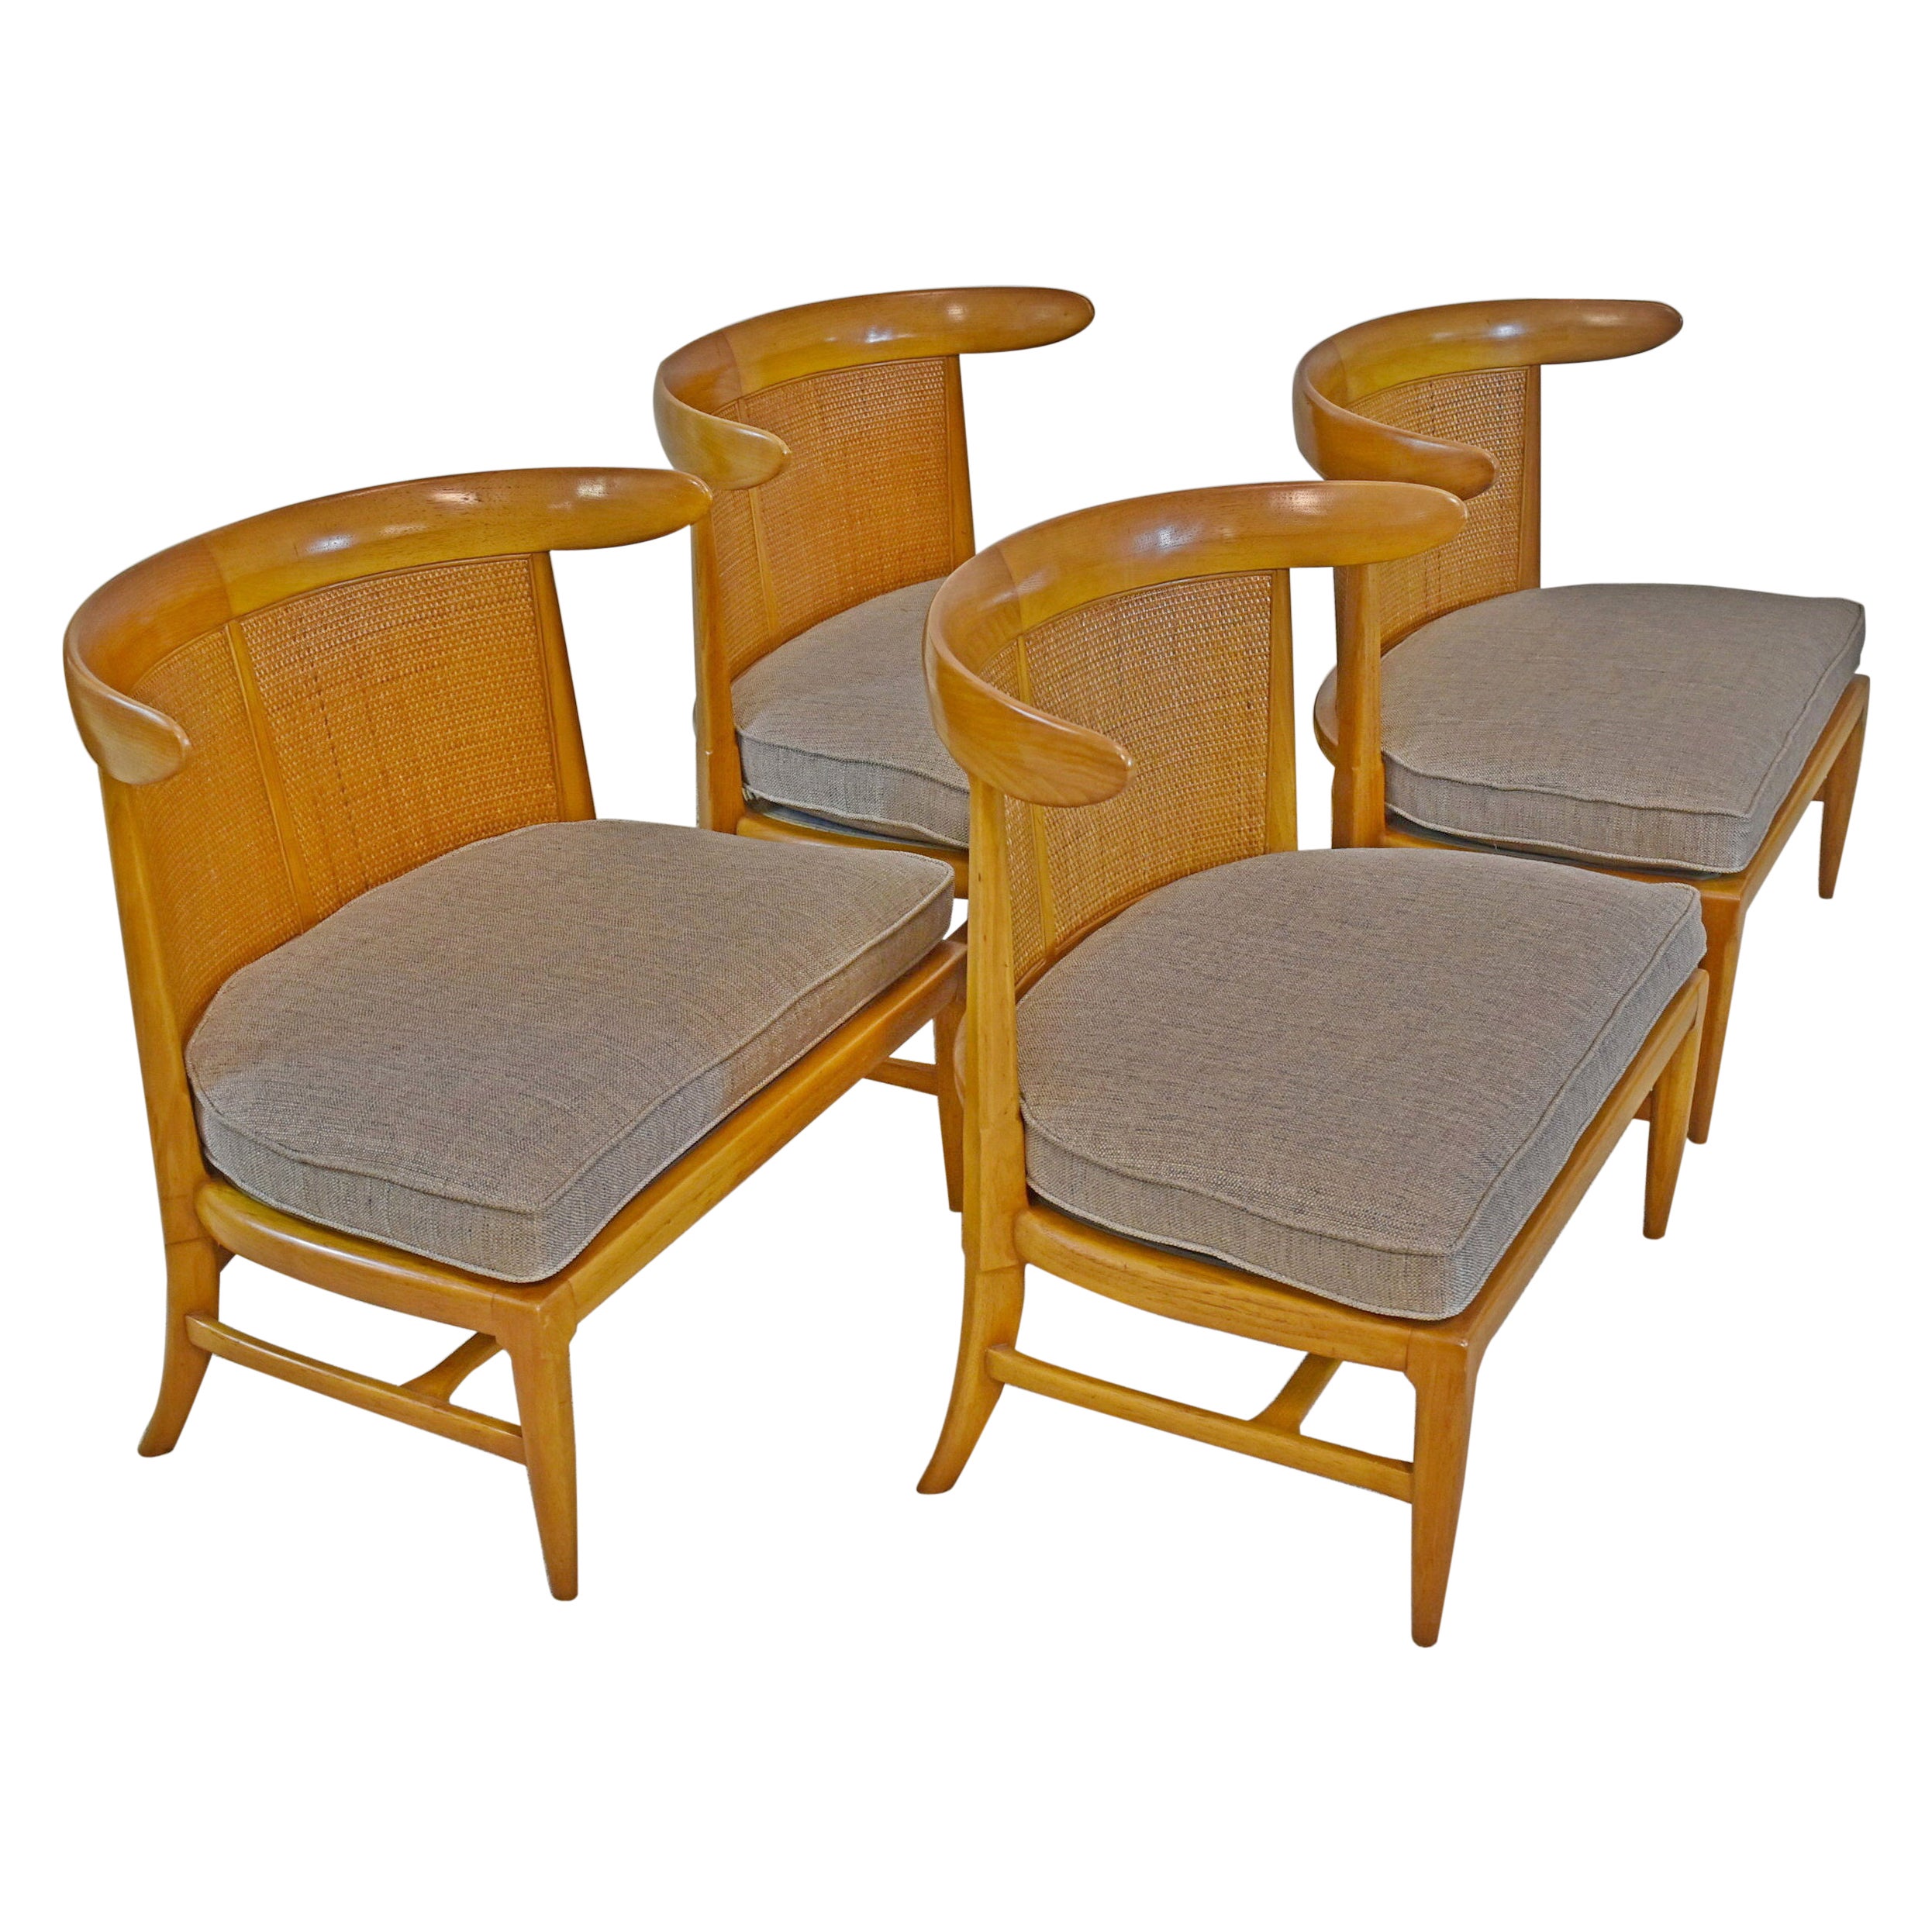 Set of 4 Tomlinson Sophisticate Slipper Chairs For Sale